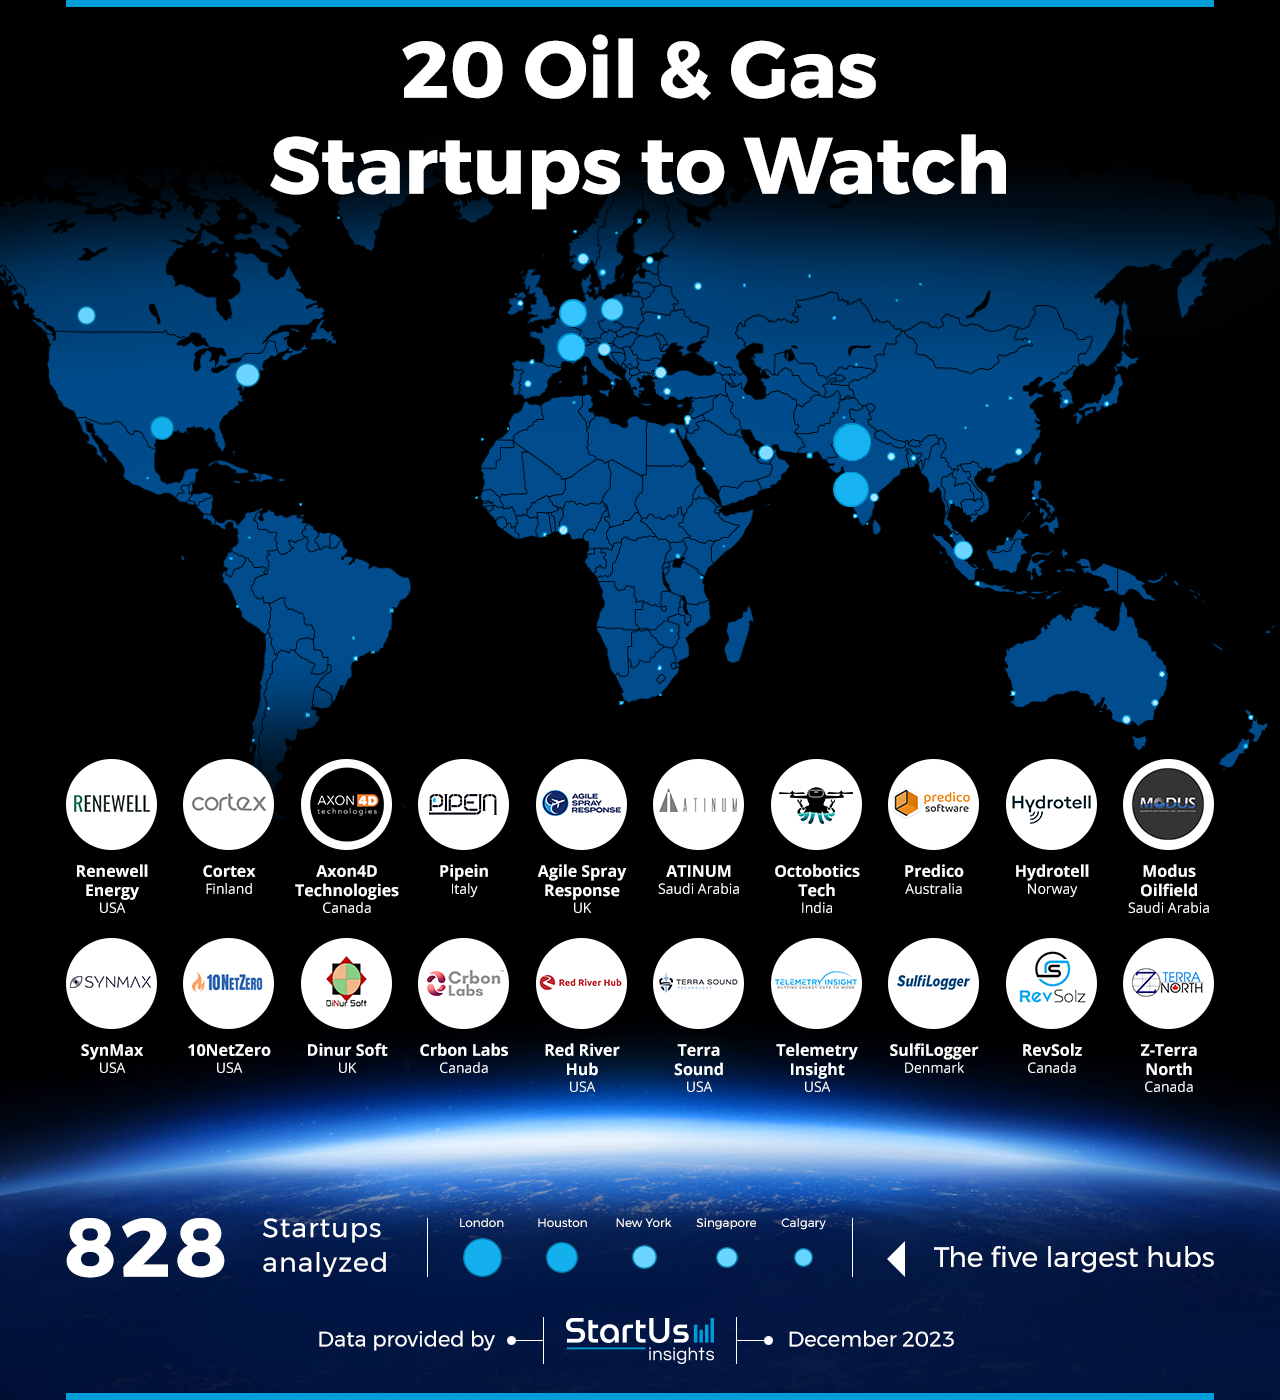 Oil-&-Gas-Startups-to-Watch-Heat-Map-StartUs-Insights-noresize